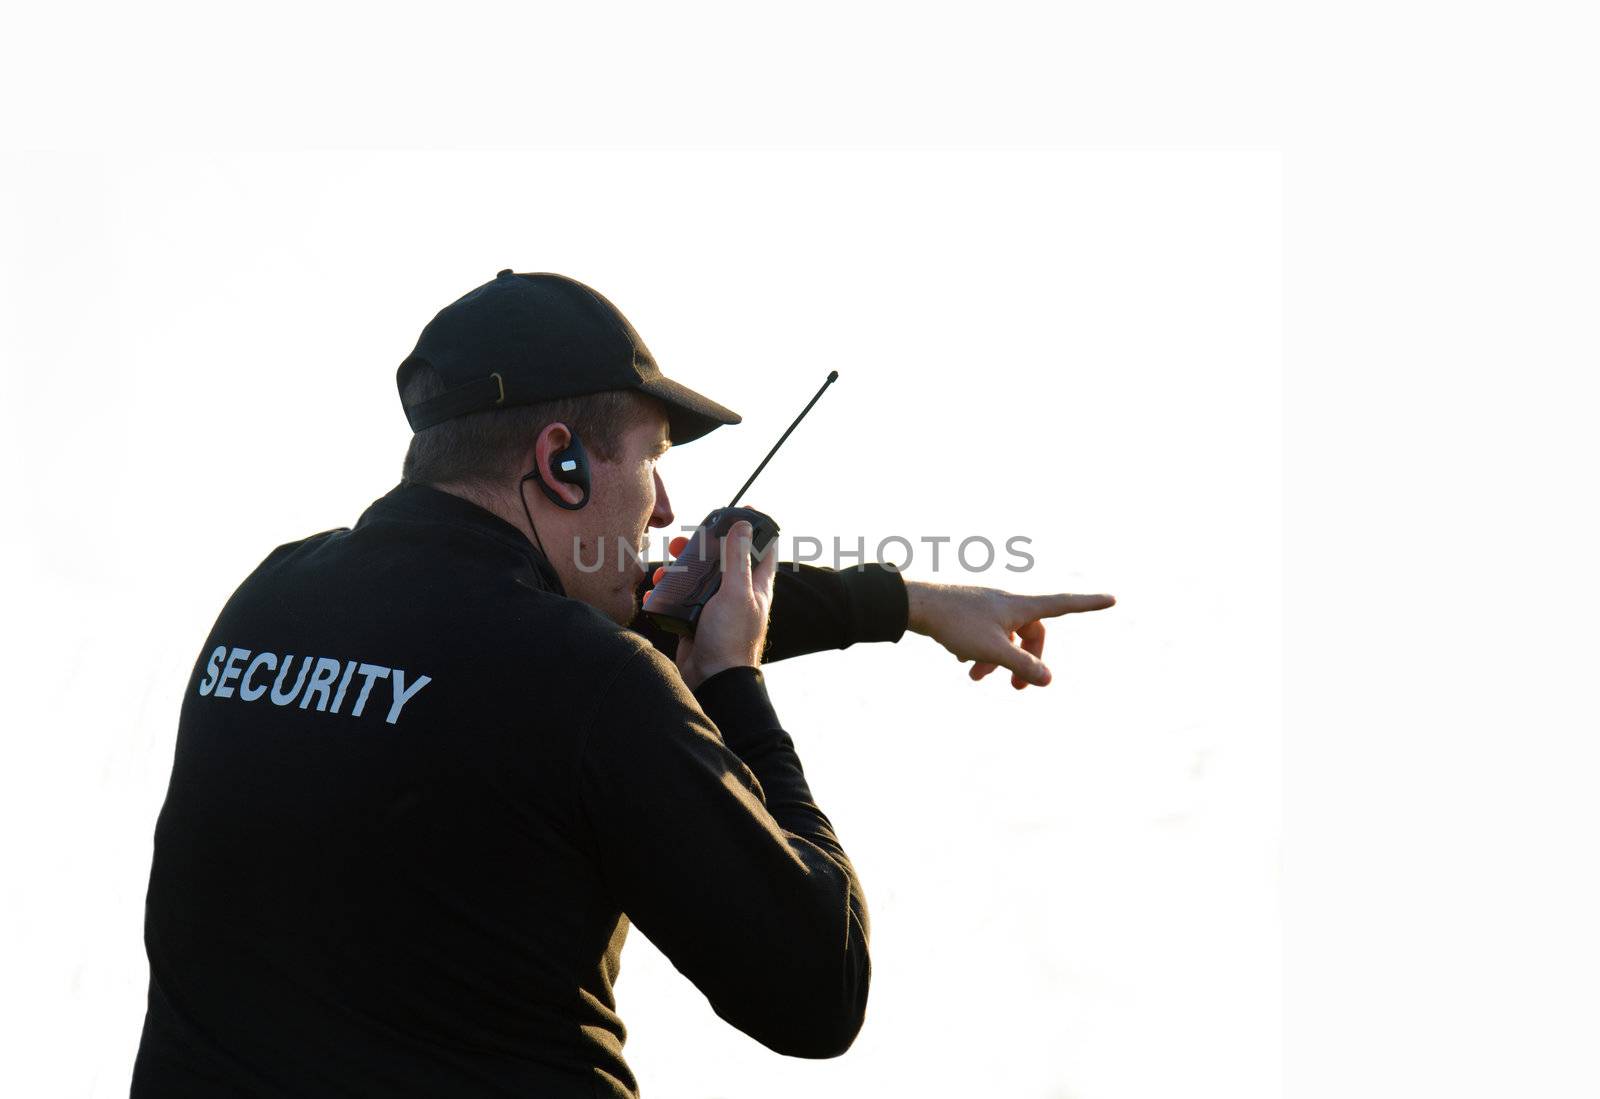 back of a security guard by lsantilli